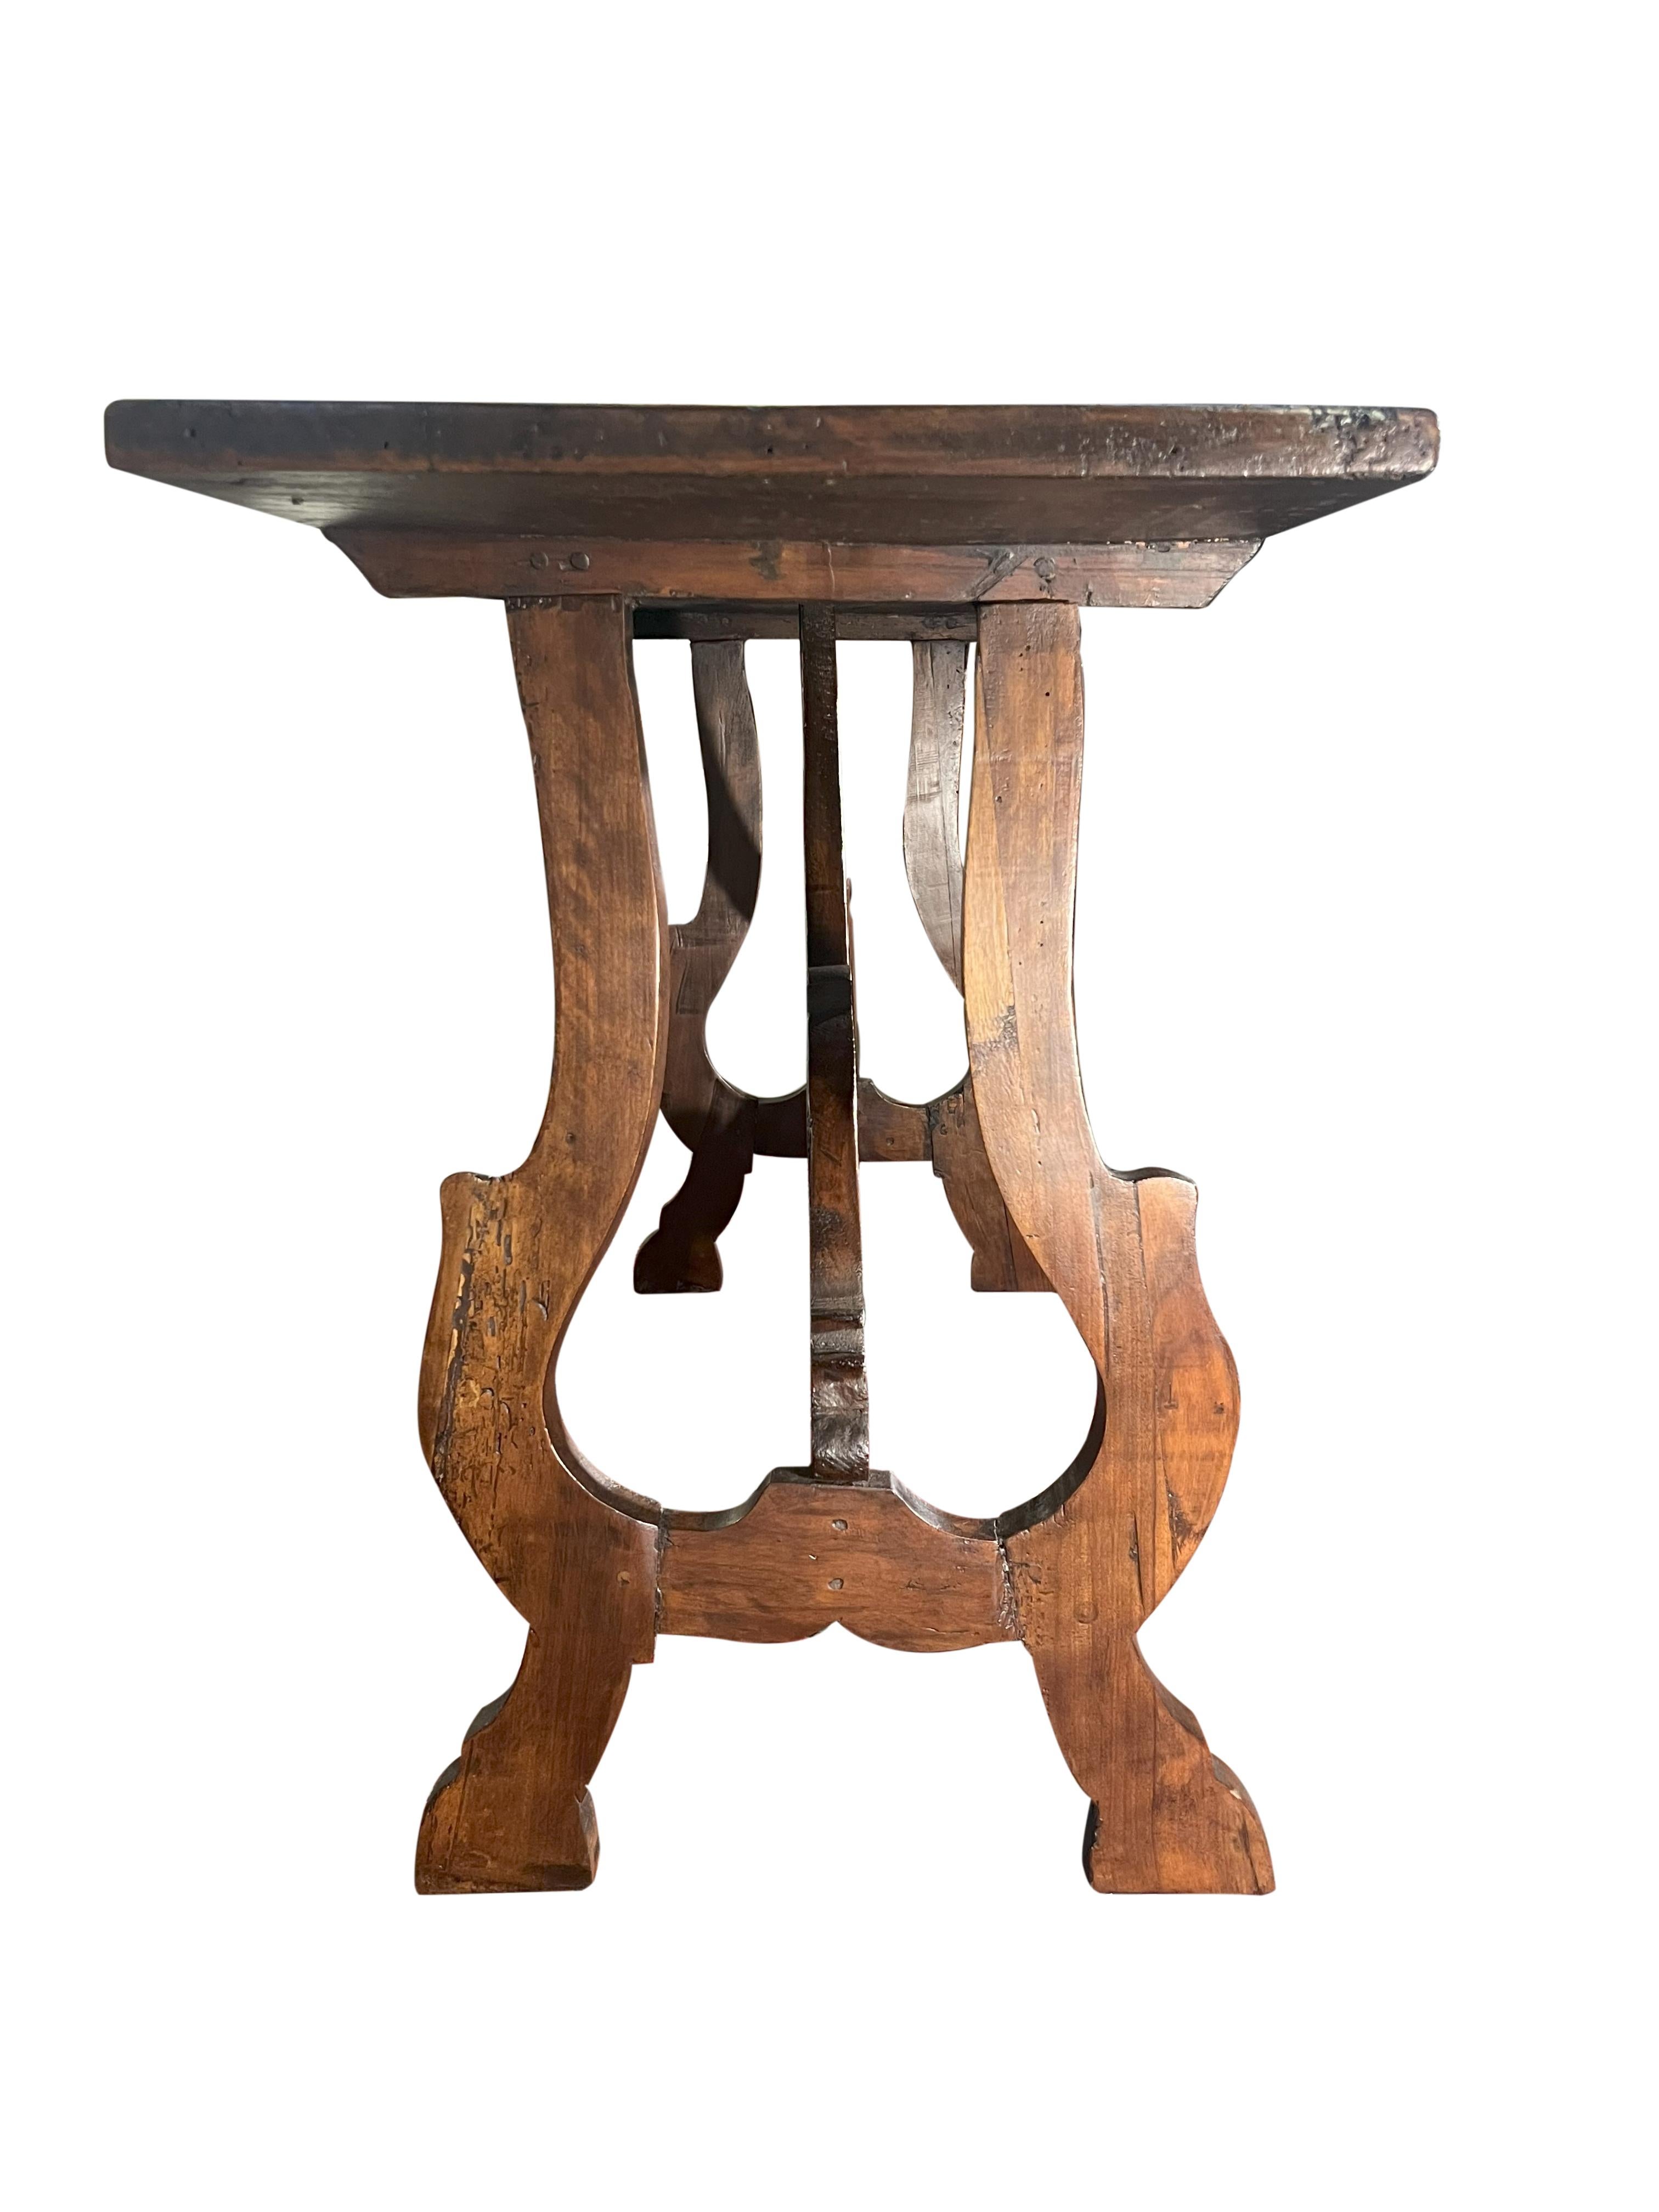  Italian 18th Century Tuscan Fratino Table with Lyre legs. For Sale 2